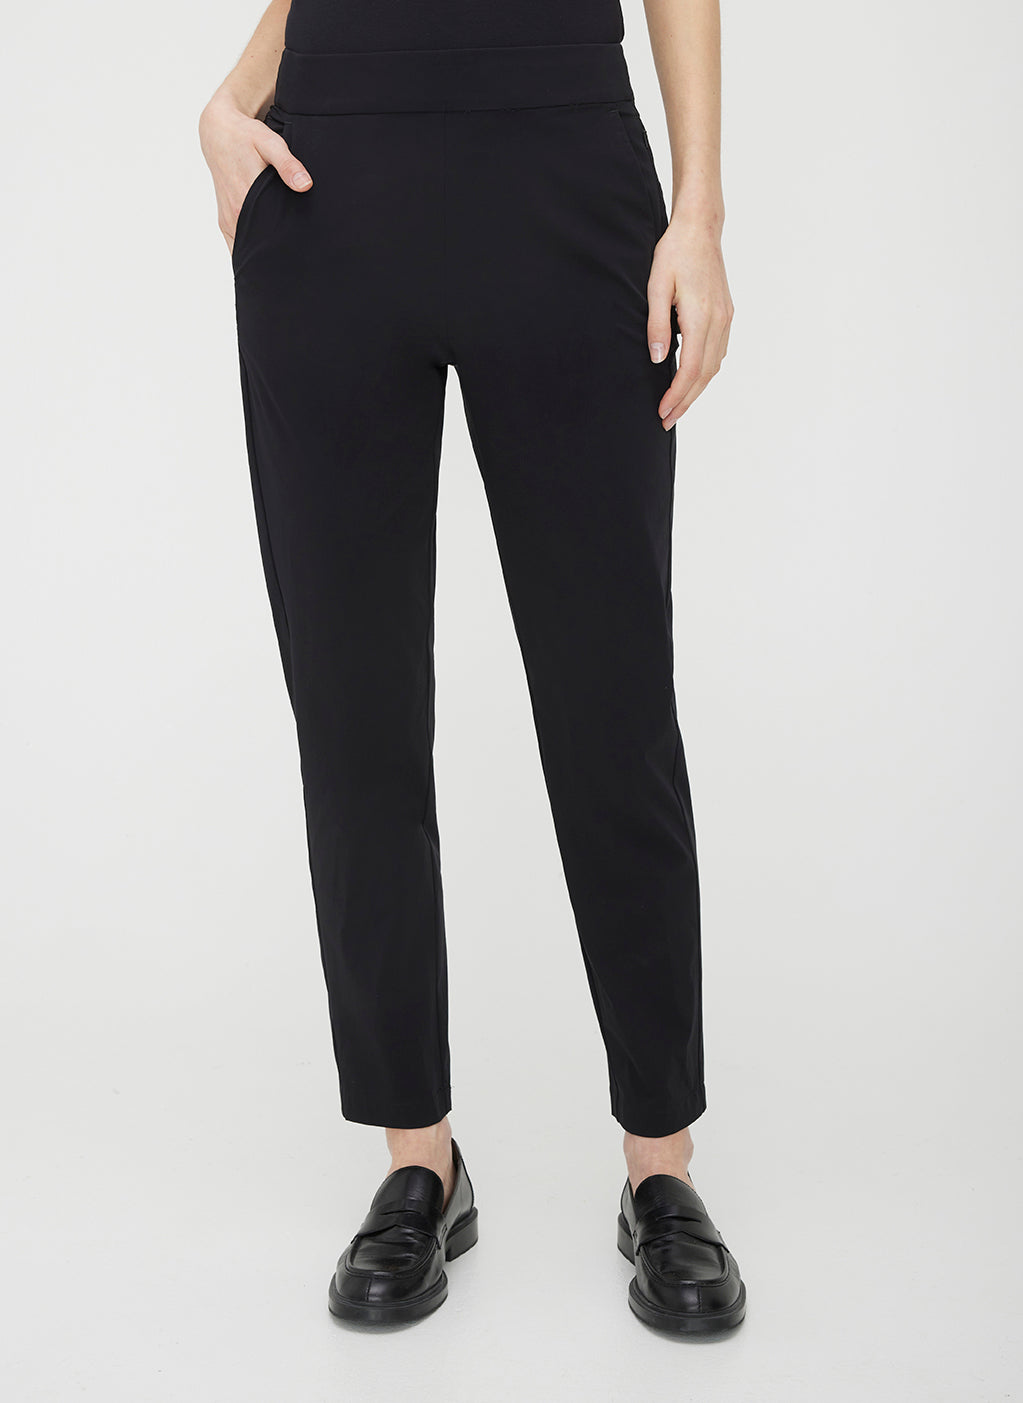 Kit and Ace — Chloe Everyday Pants